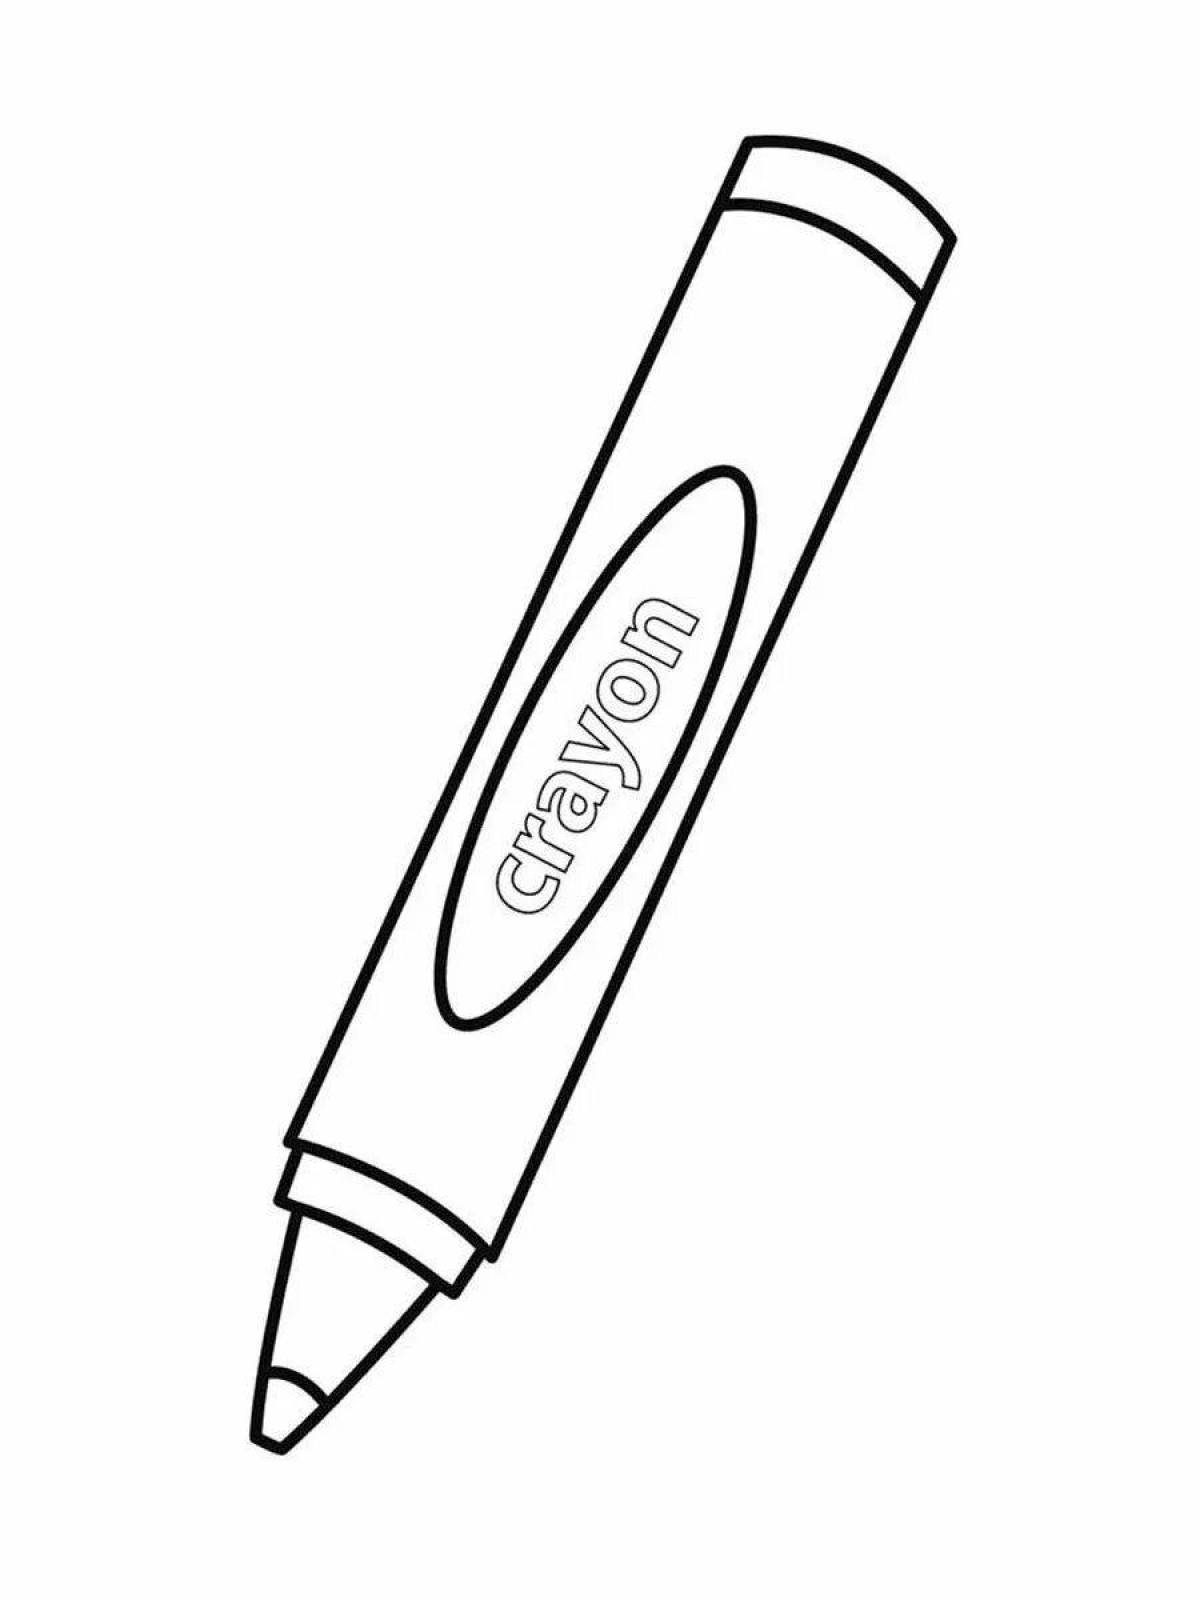 Fun coloring book for scratch markers